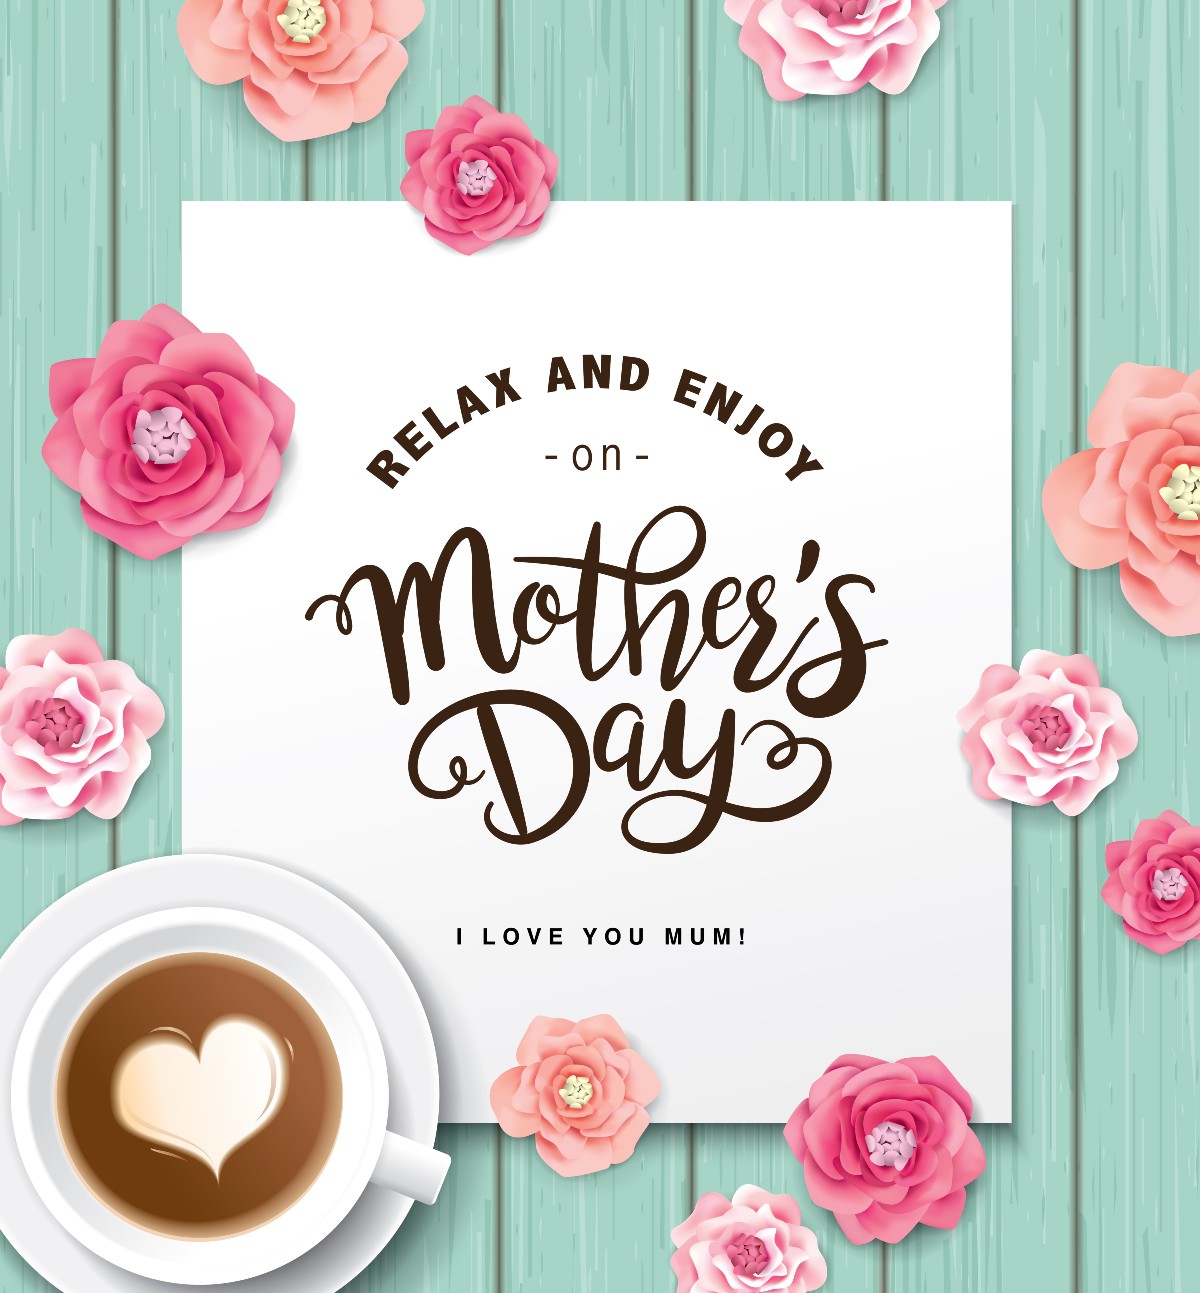 Mother's Day 2021: Images, Wishes, Quotes, Messages and WhatsApp ...